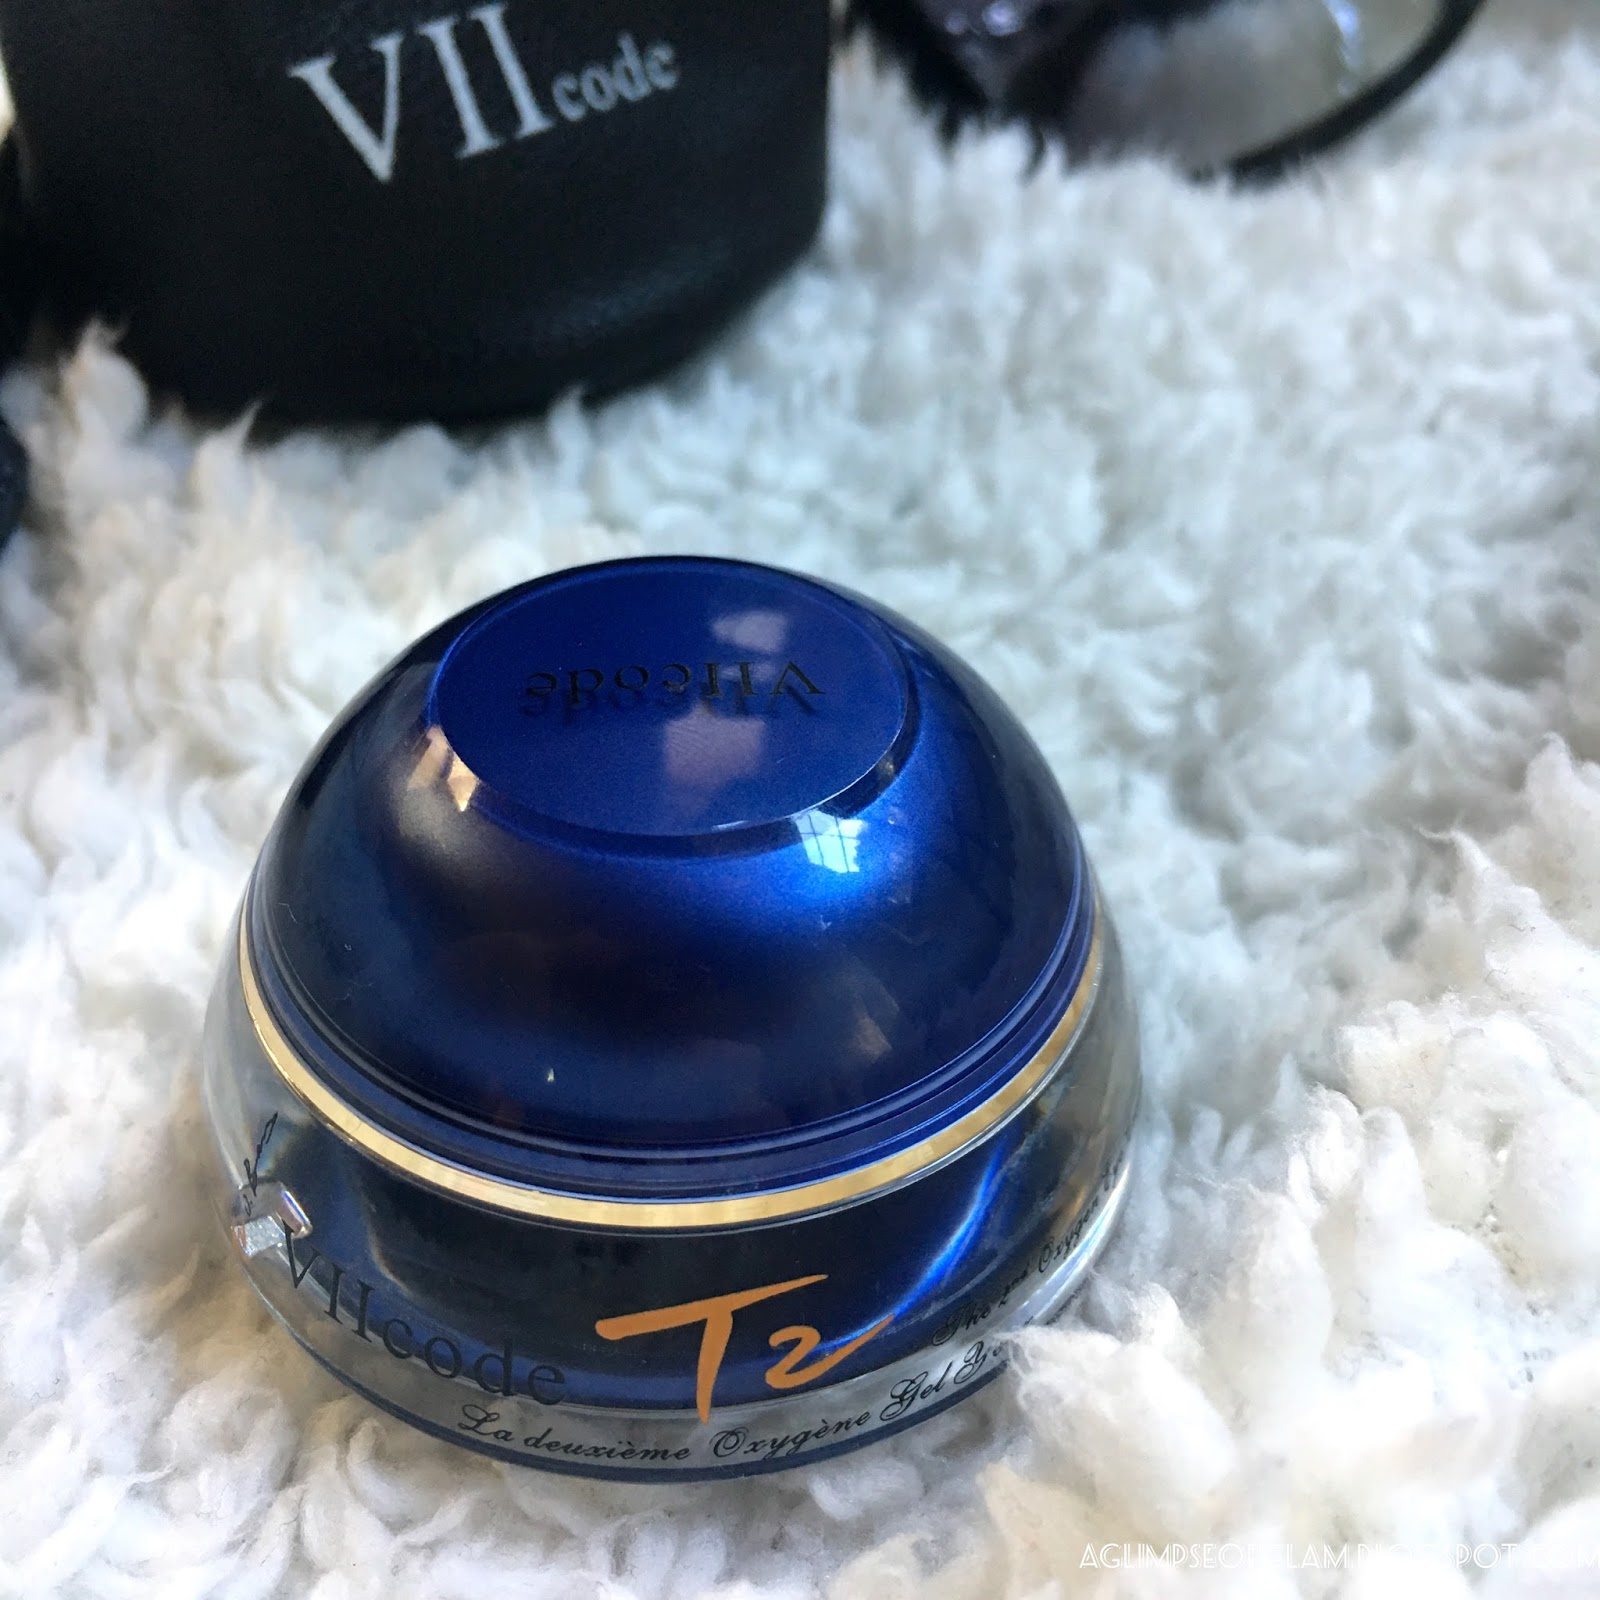 Show Your Eyes Some Love: VIICode Oxygen Eye Cream Review PLUS GIVEAWAY ...